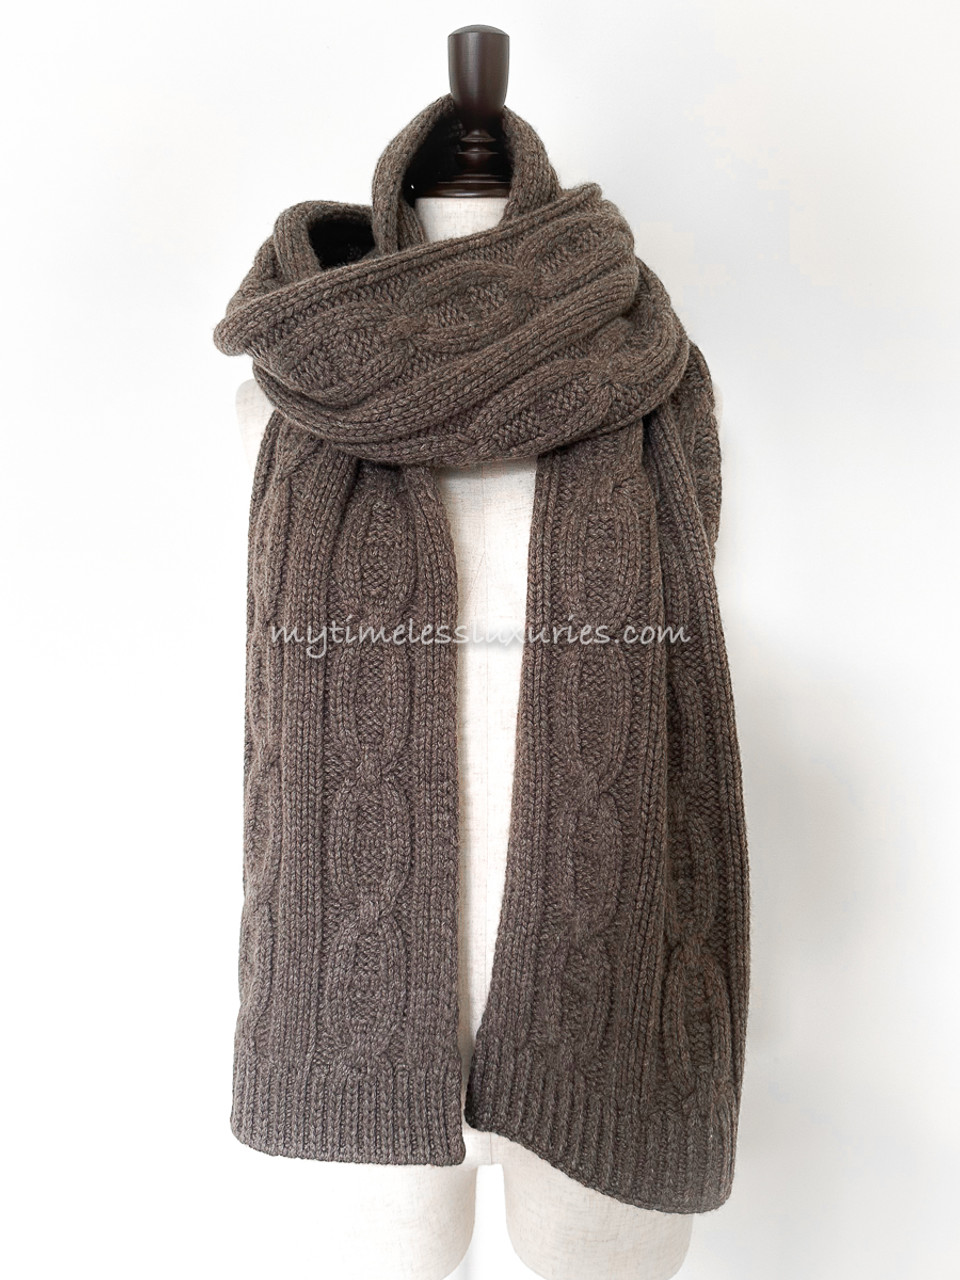 HERMES Tri Maillon Muffler Marron Glace *New - Timeless Luxuries